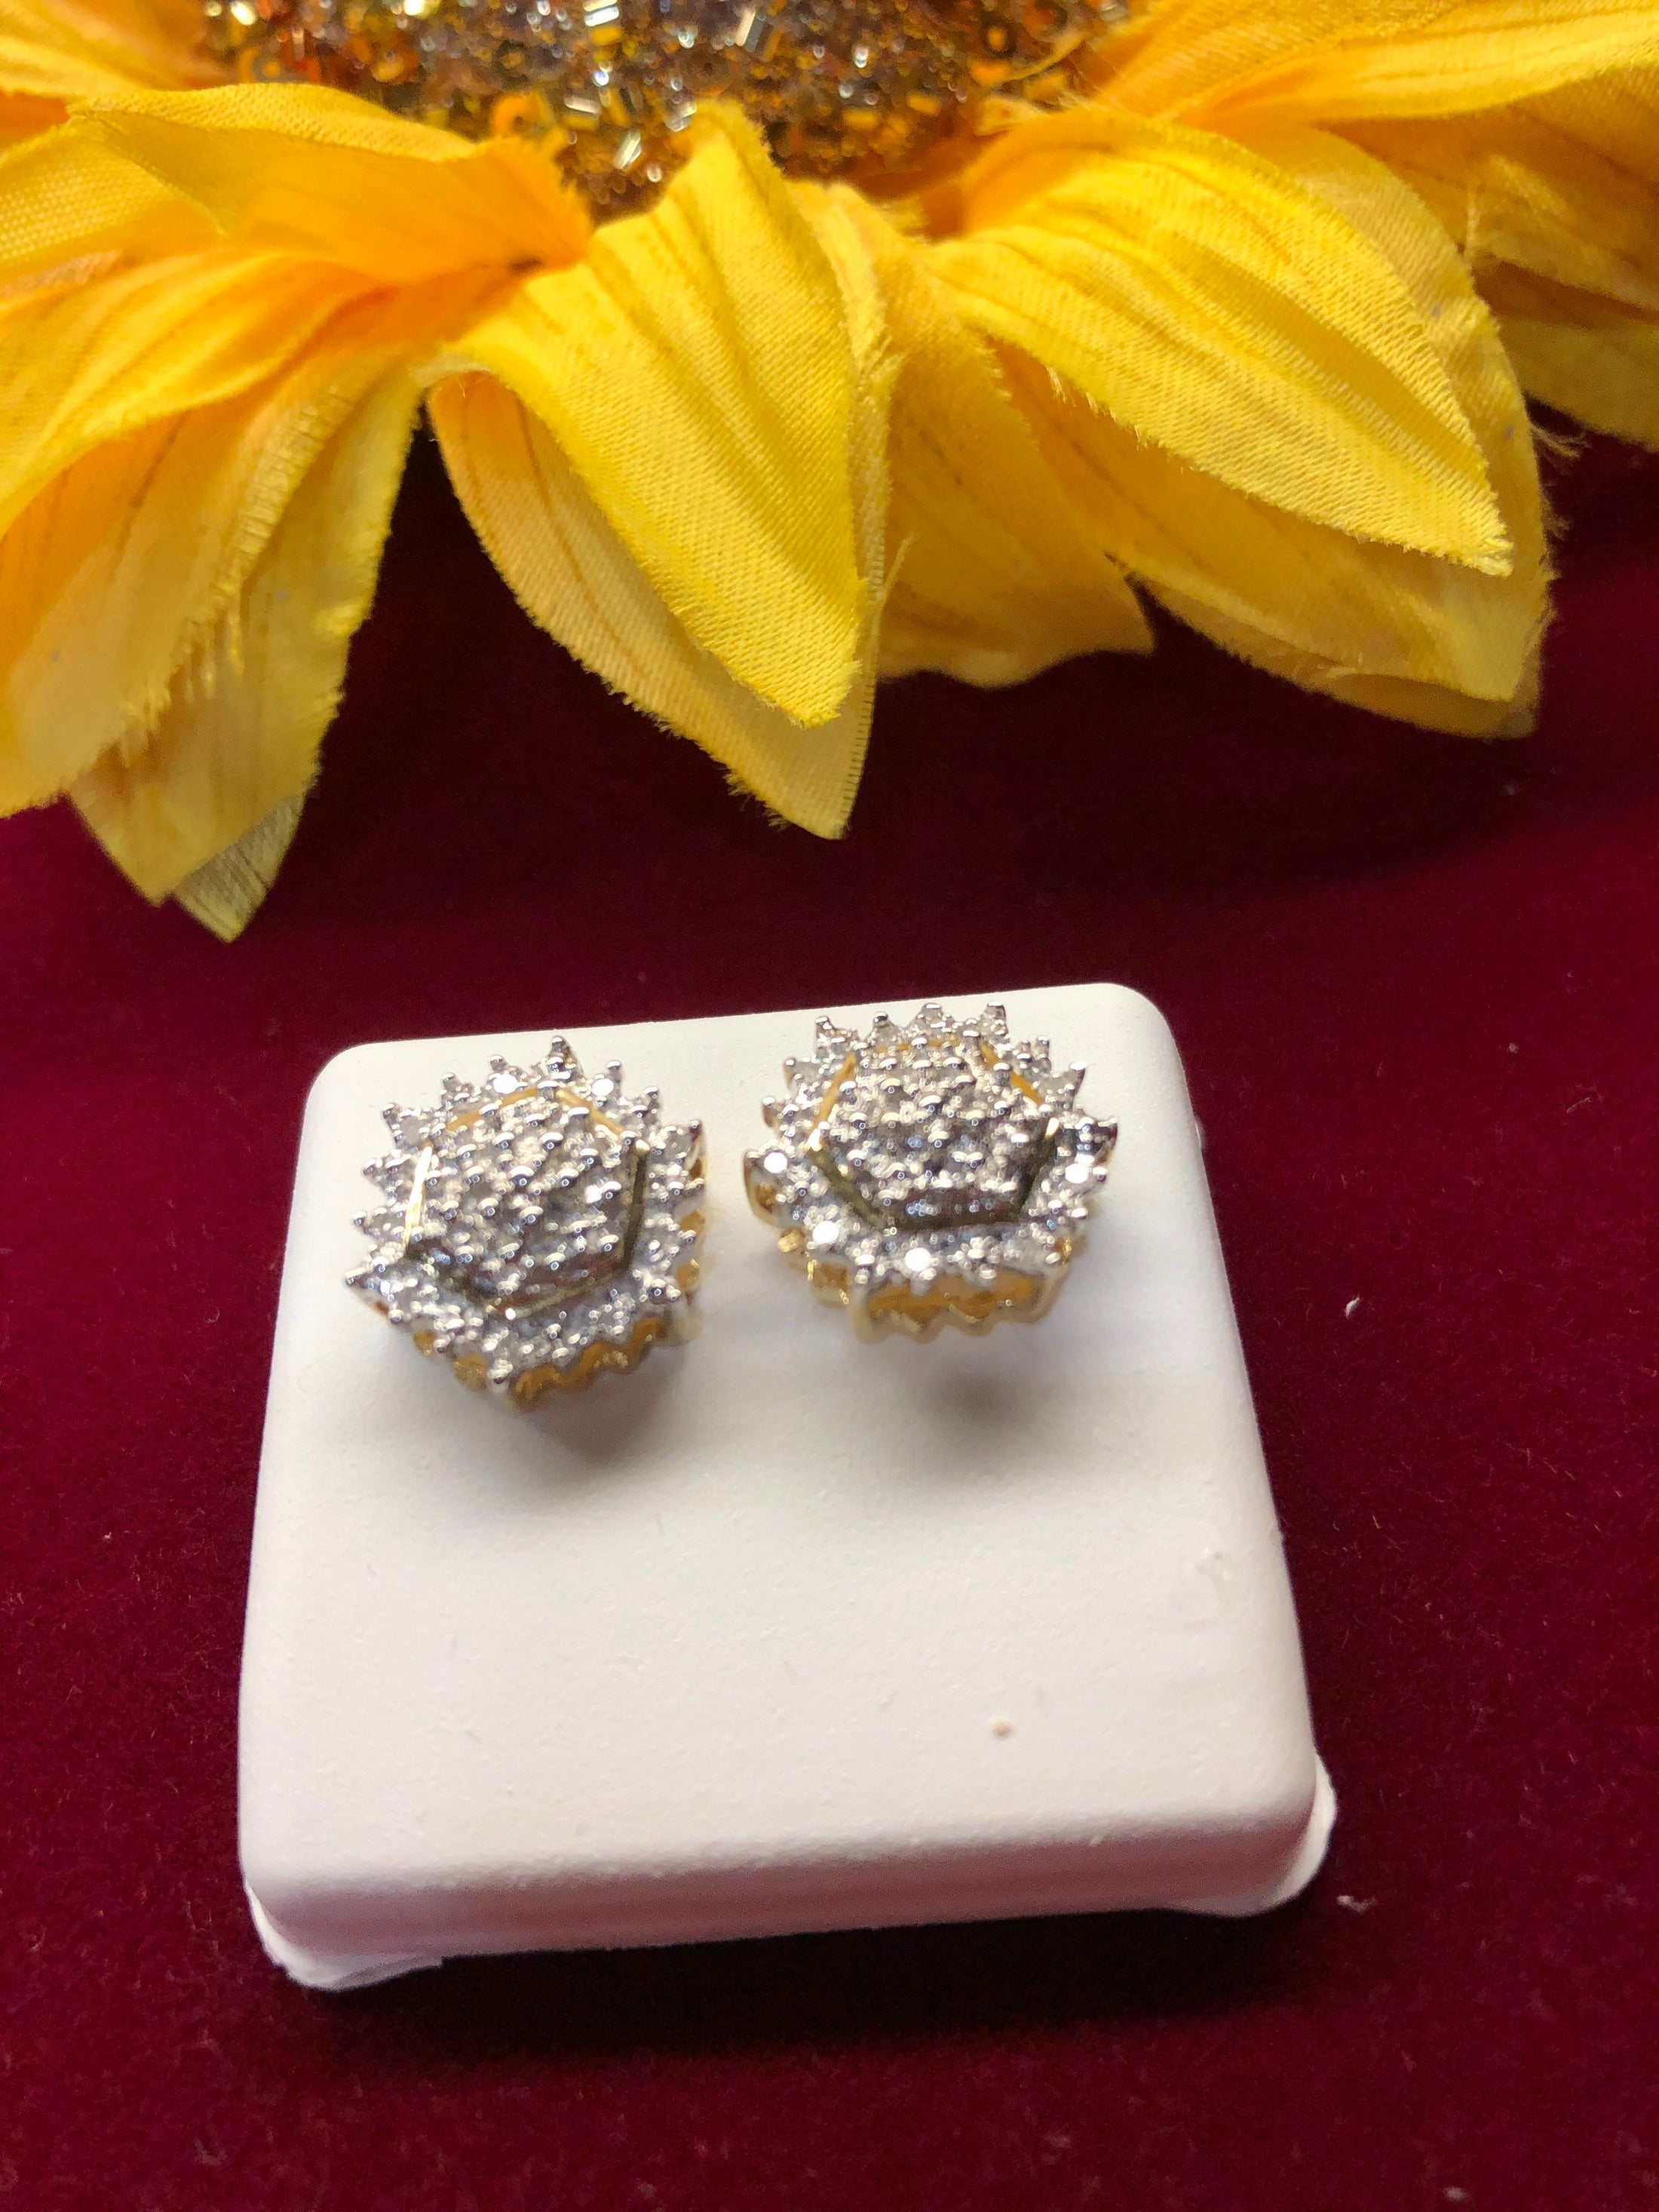 The perfect set of diamond earrings for men or women. Walk in and make a statement with this beautiful real diamond earring. 1/5cttw